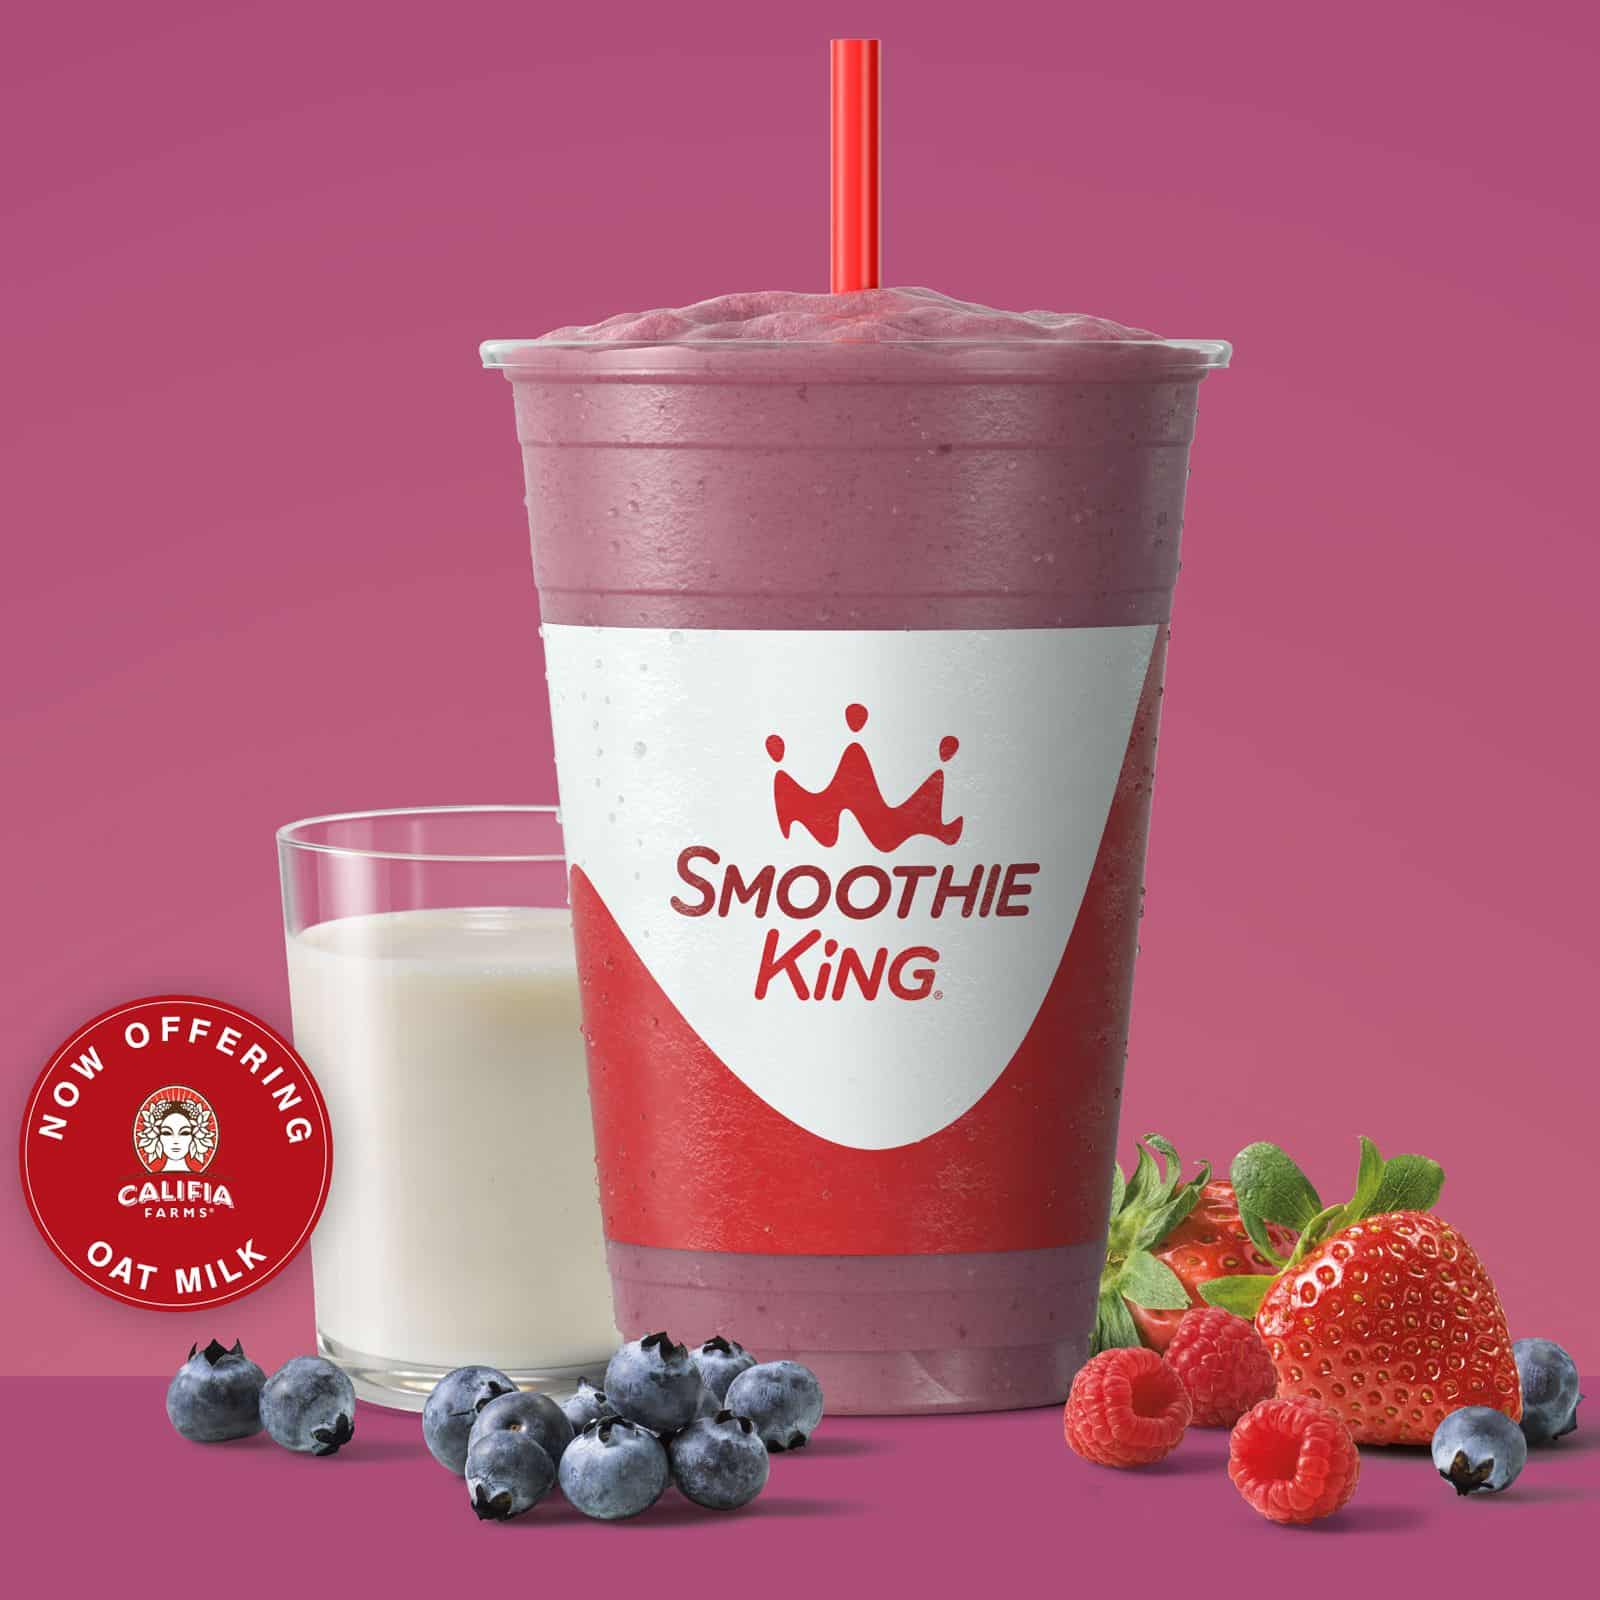 Meal Replacement Smoothies From Smoothie King